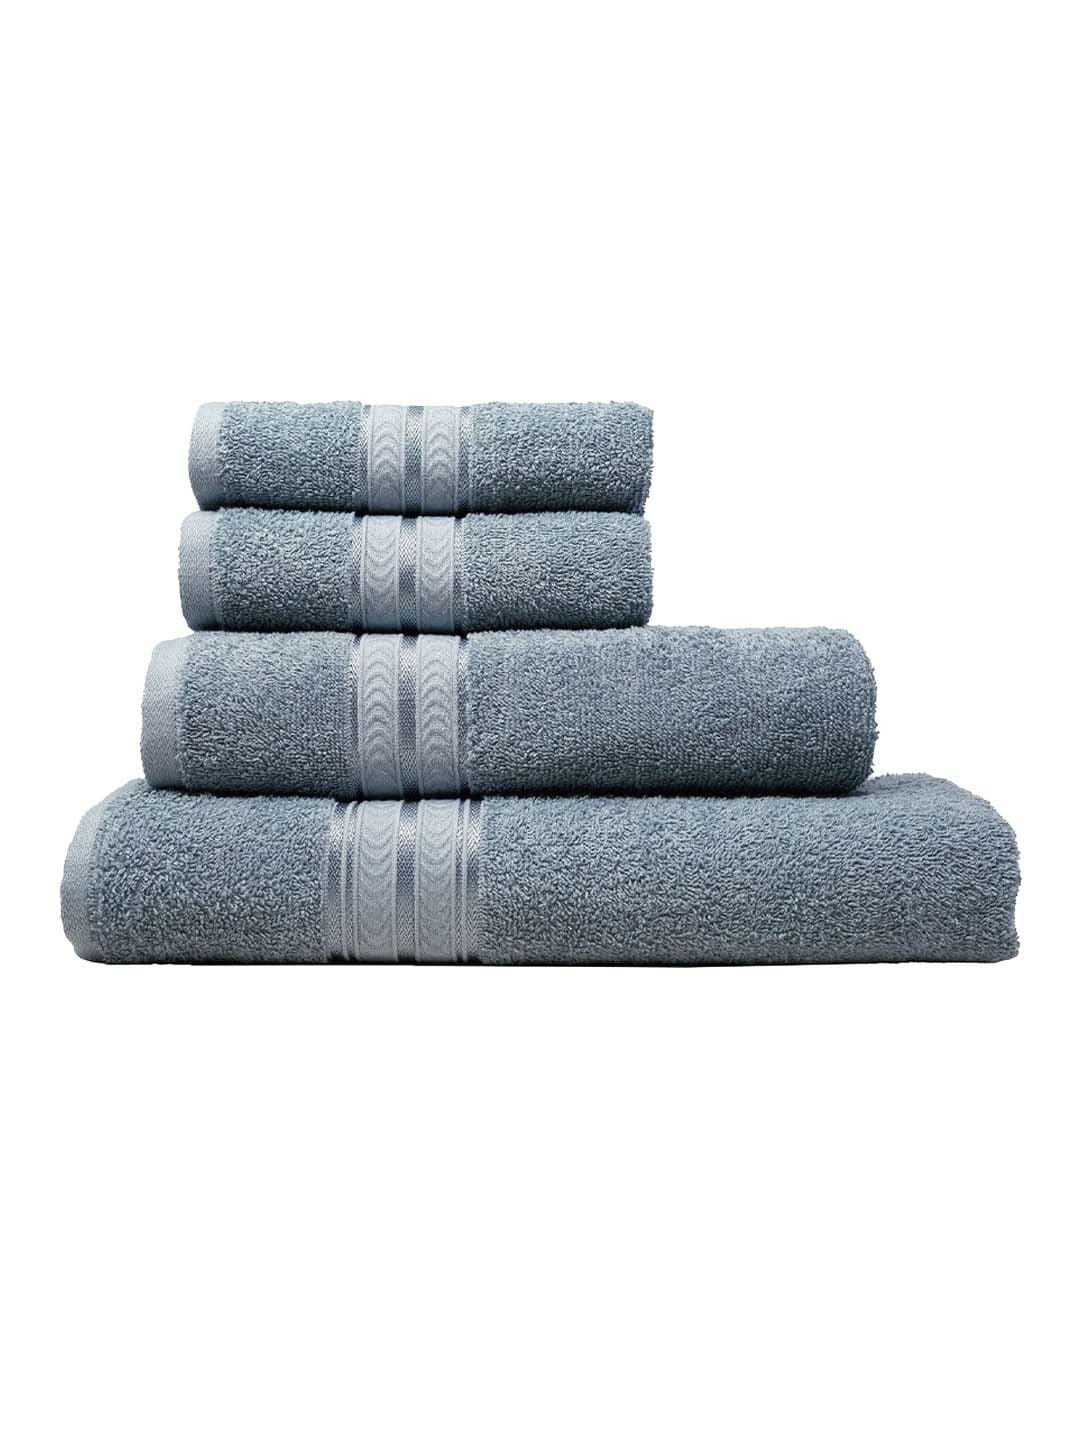 Trident Set Of 4 Grey Solid Pure Cotton 400 GSM Towel Set Price in India